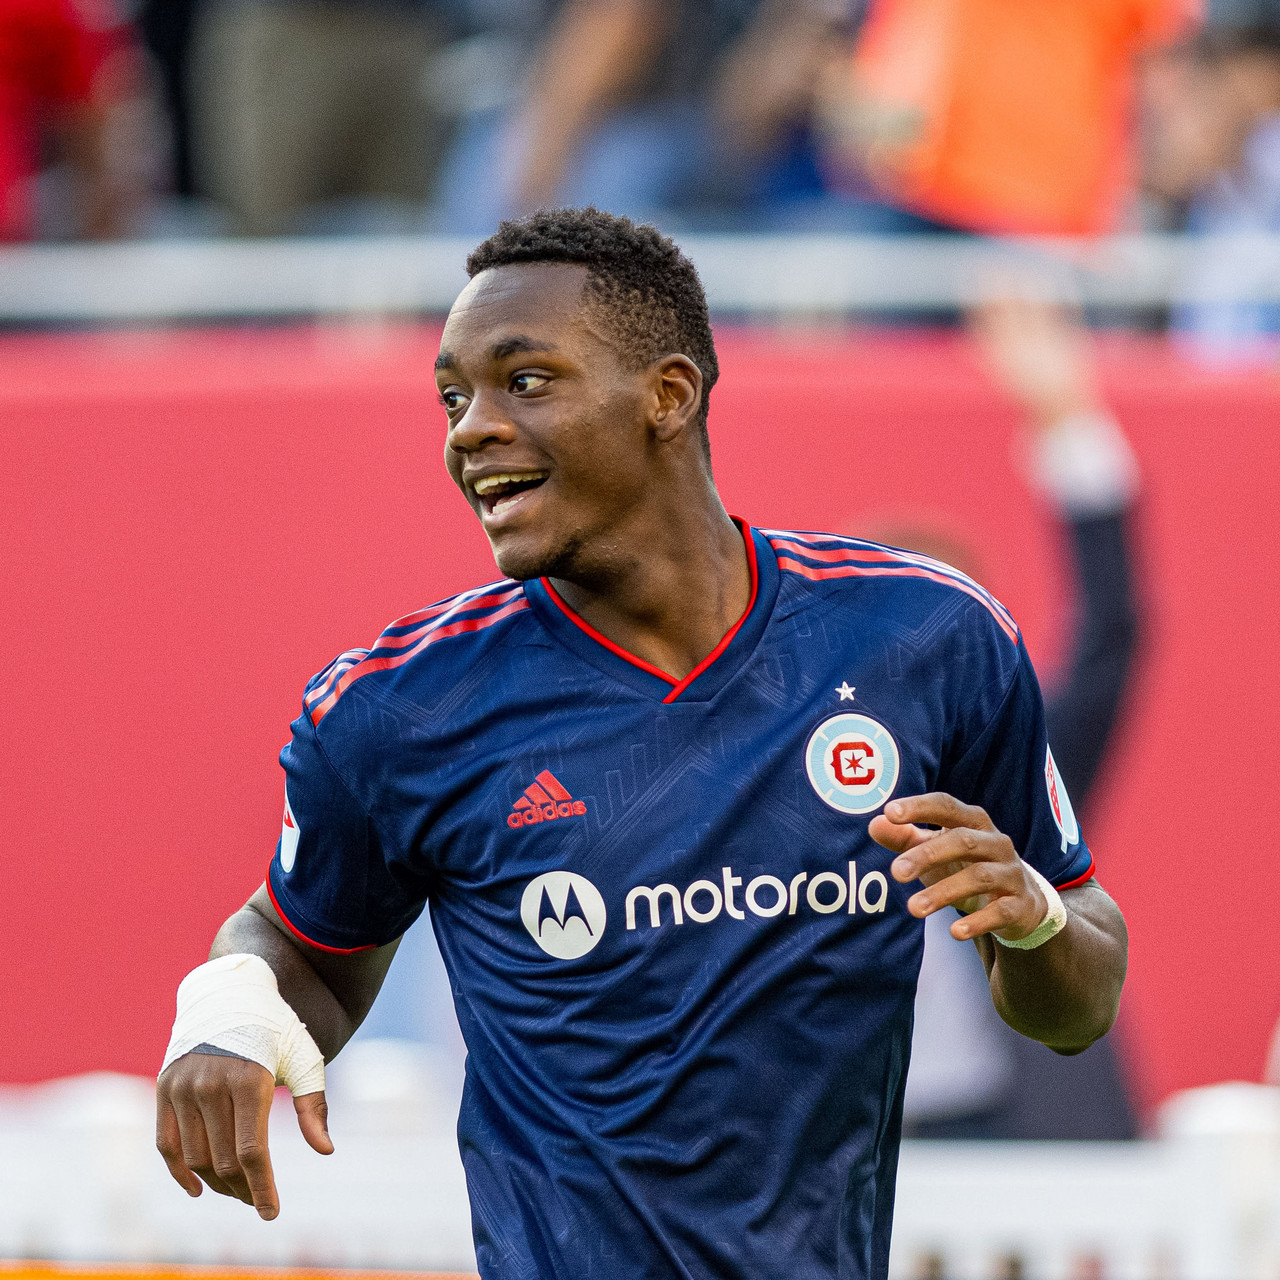 Chicago Fire 2-0 Toronto FC: Live to fight another day